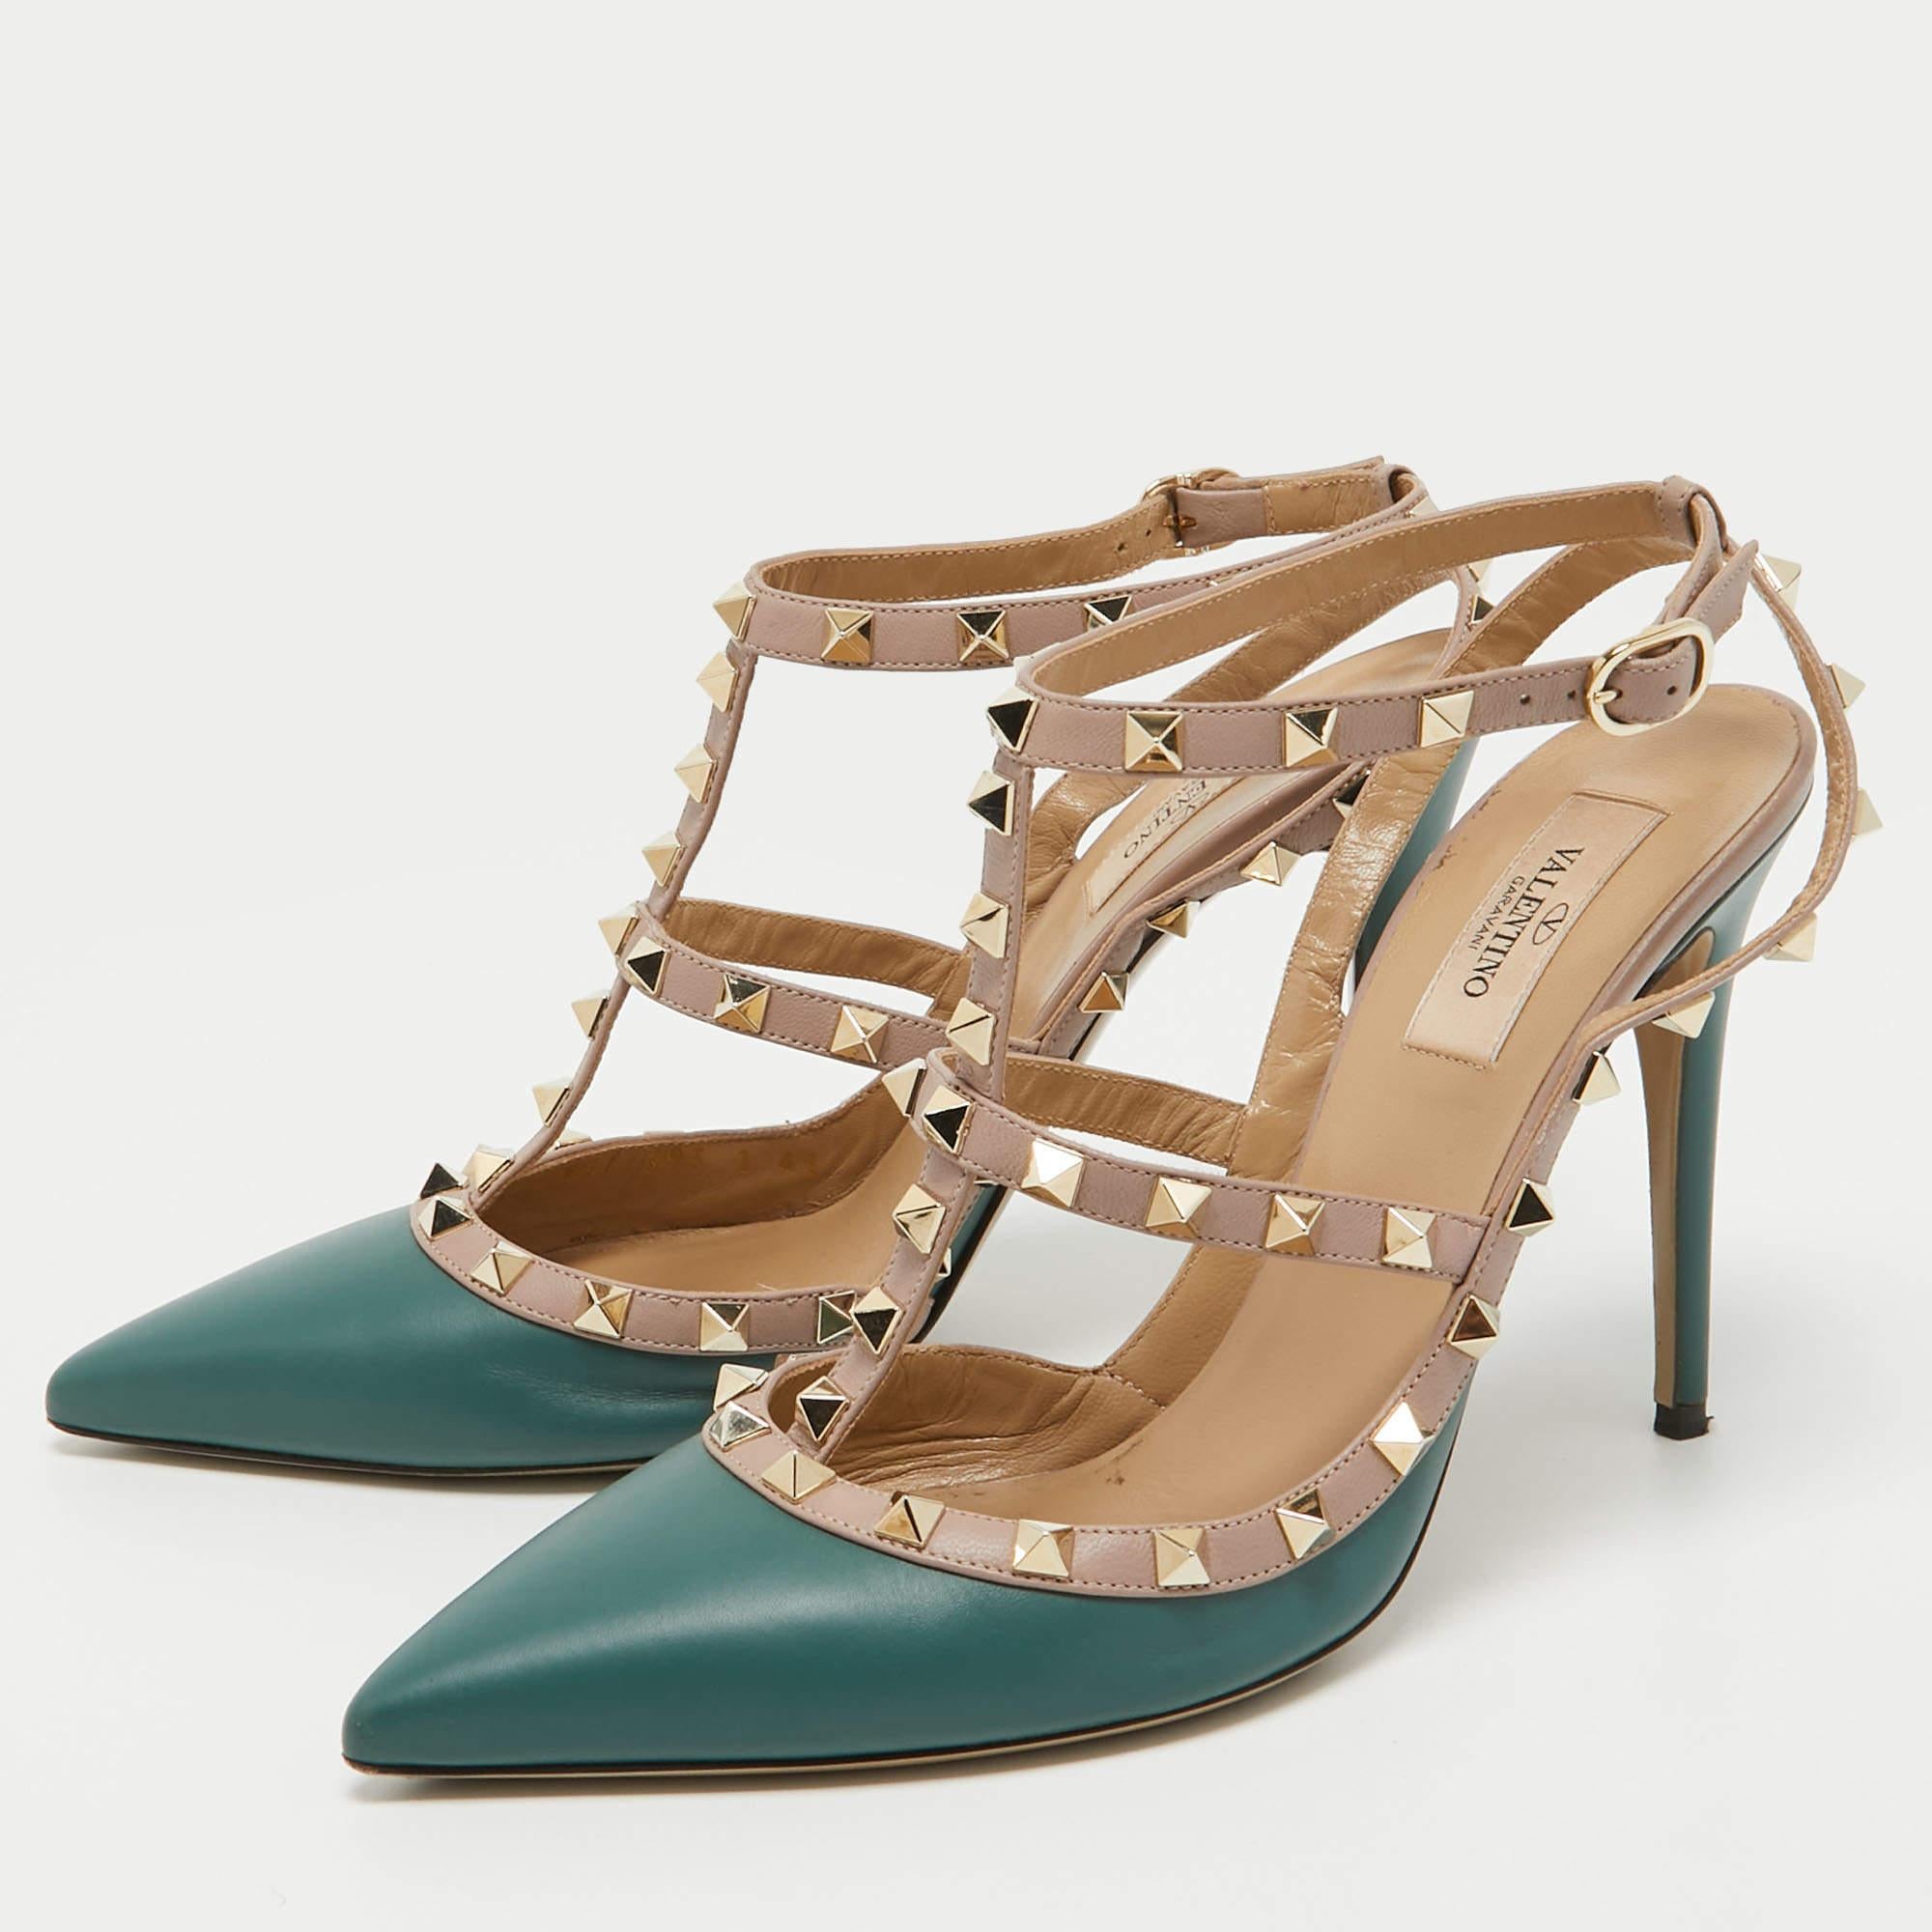 Valentino Green/Beige Leather Caged Rockstud Pumps Size 41 1